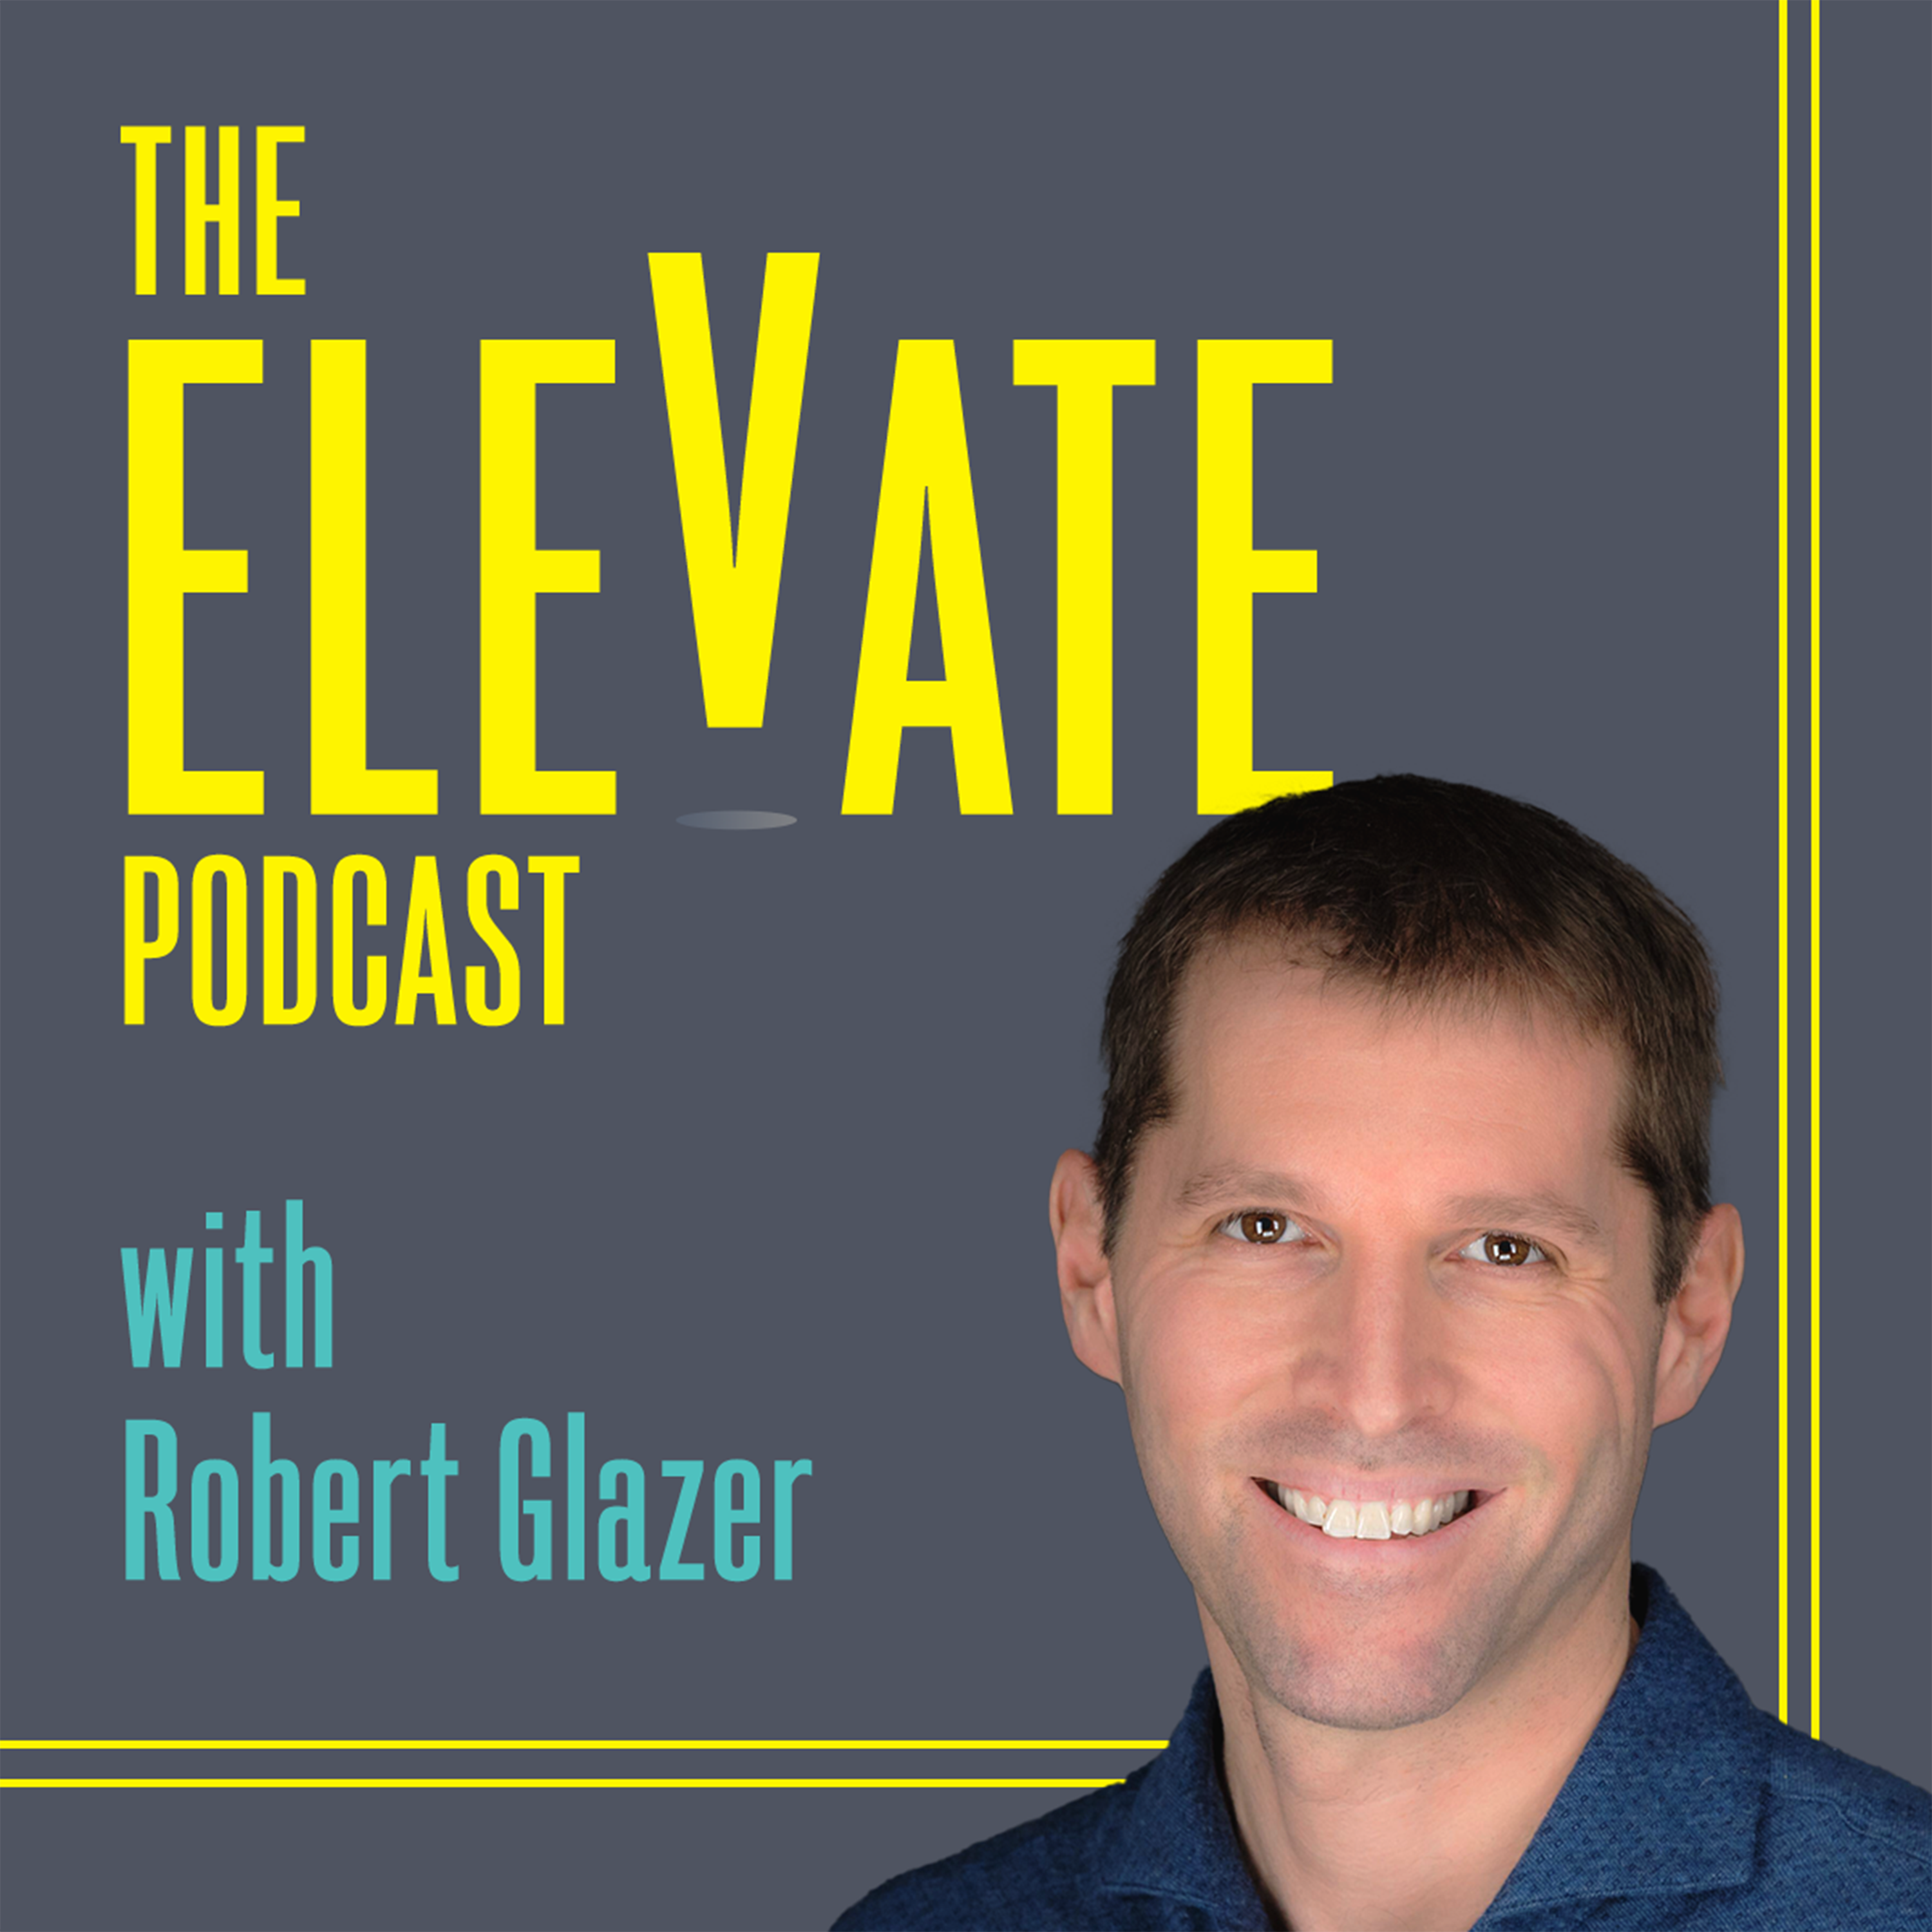 The Elevate Podcast